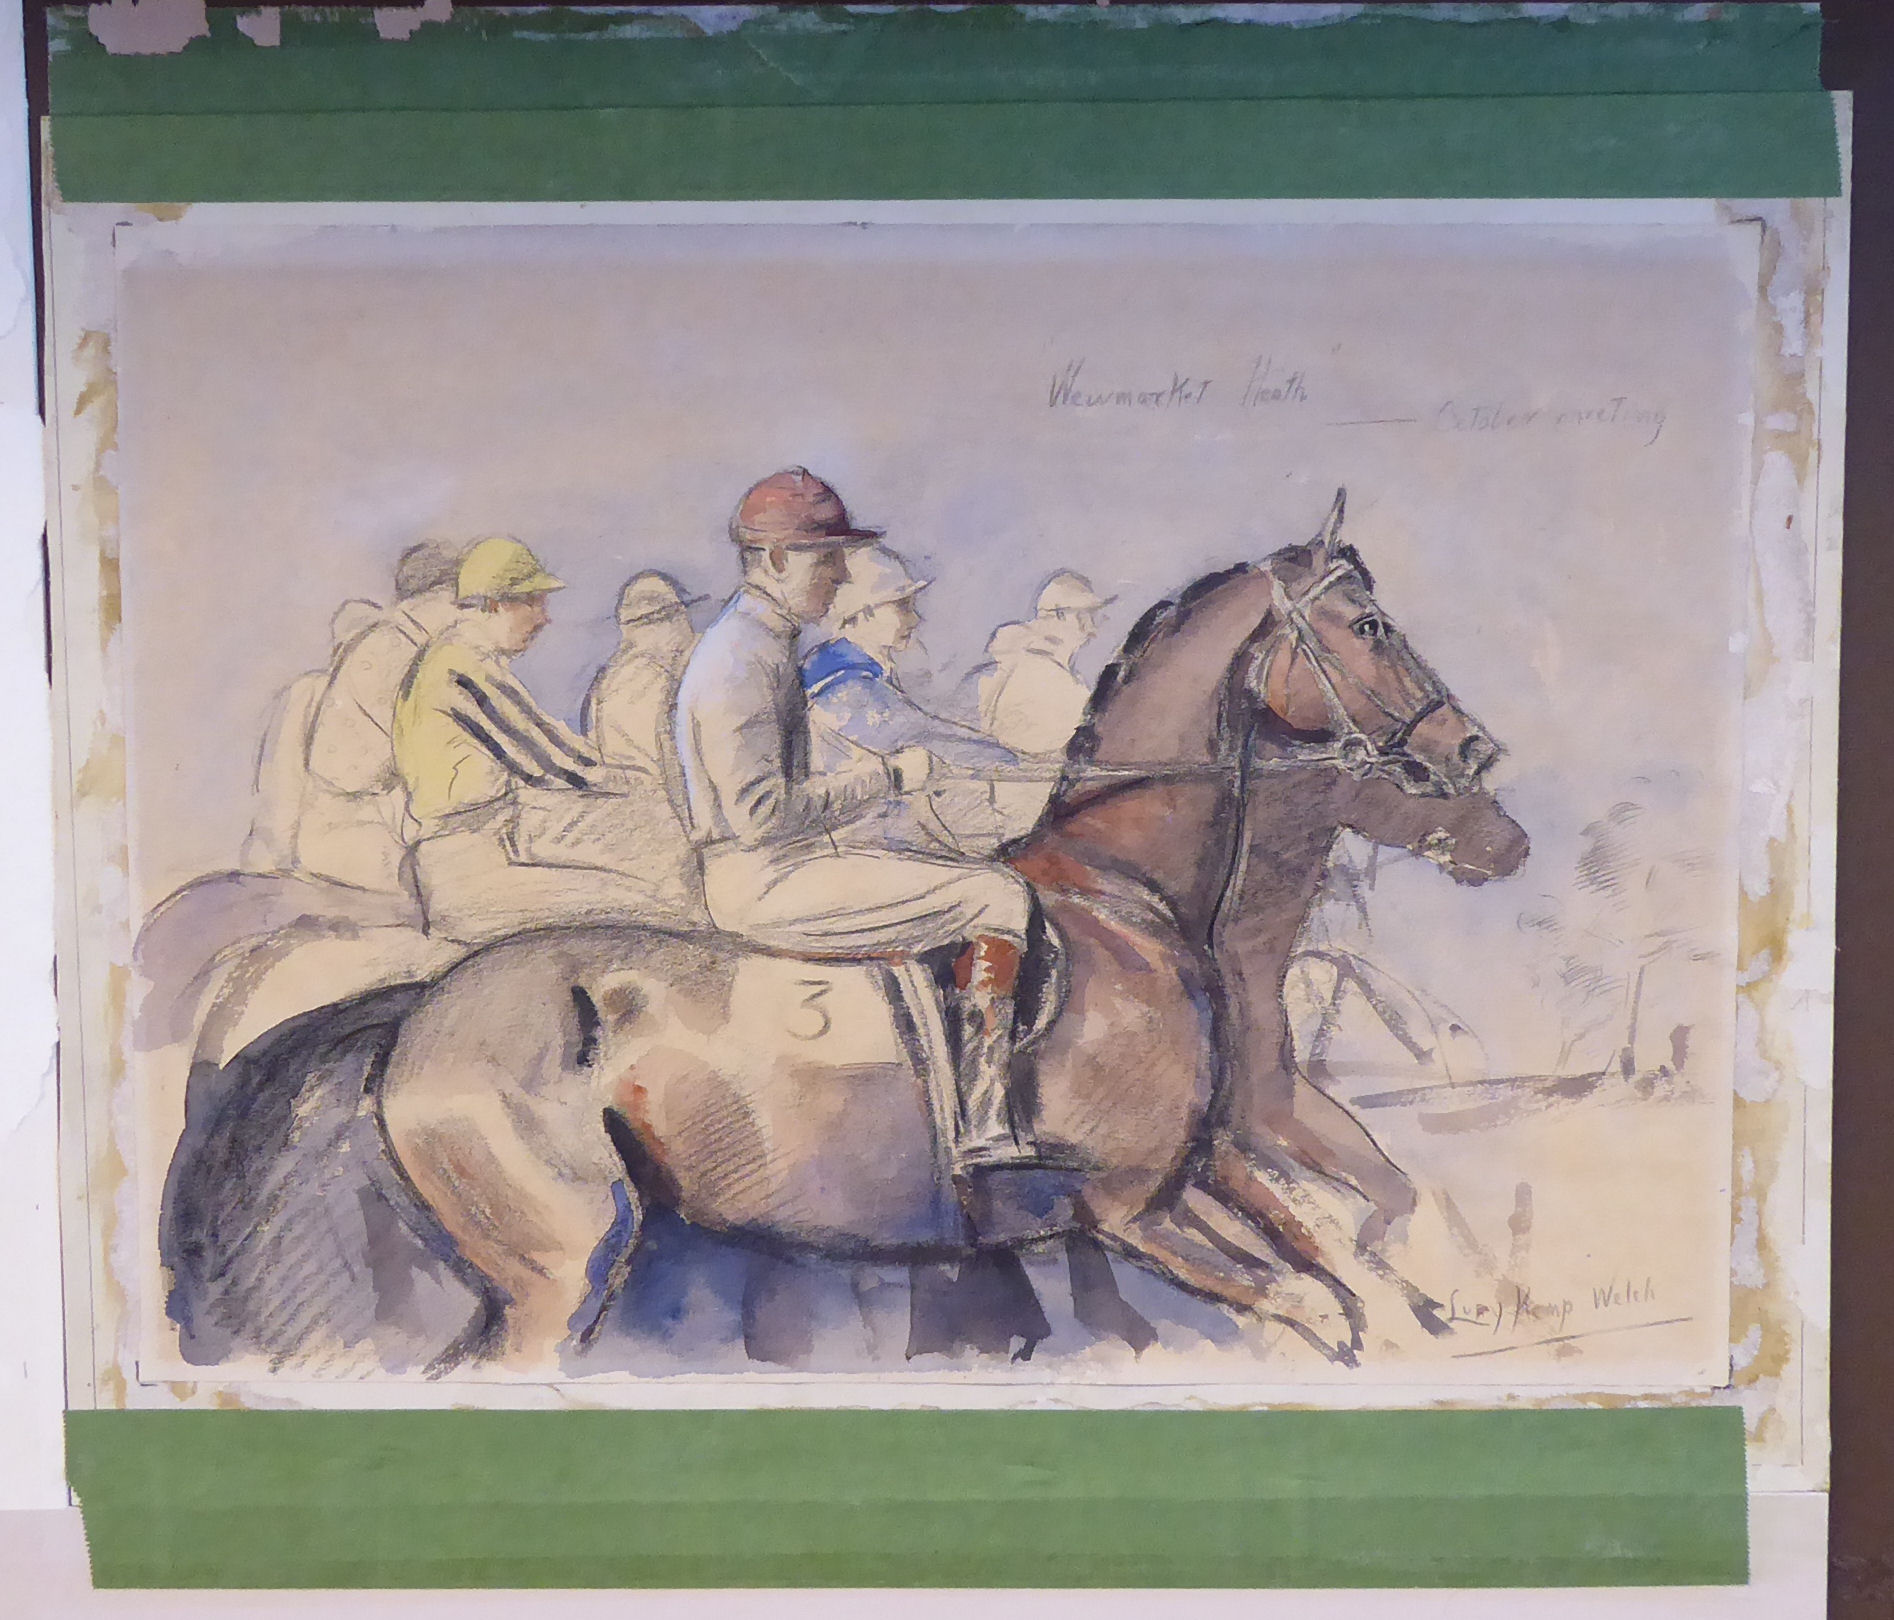 Lucy Kemp Welch - 'Newmarket Heath October Meeting' pencil & watercolour bears an inscription & - Image 12 of 16